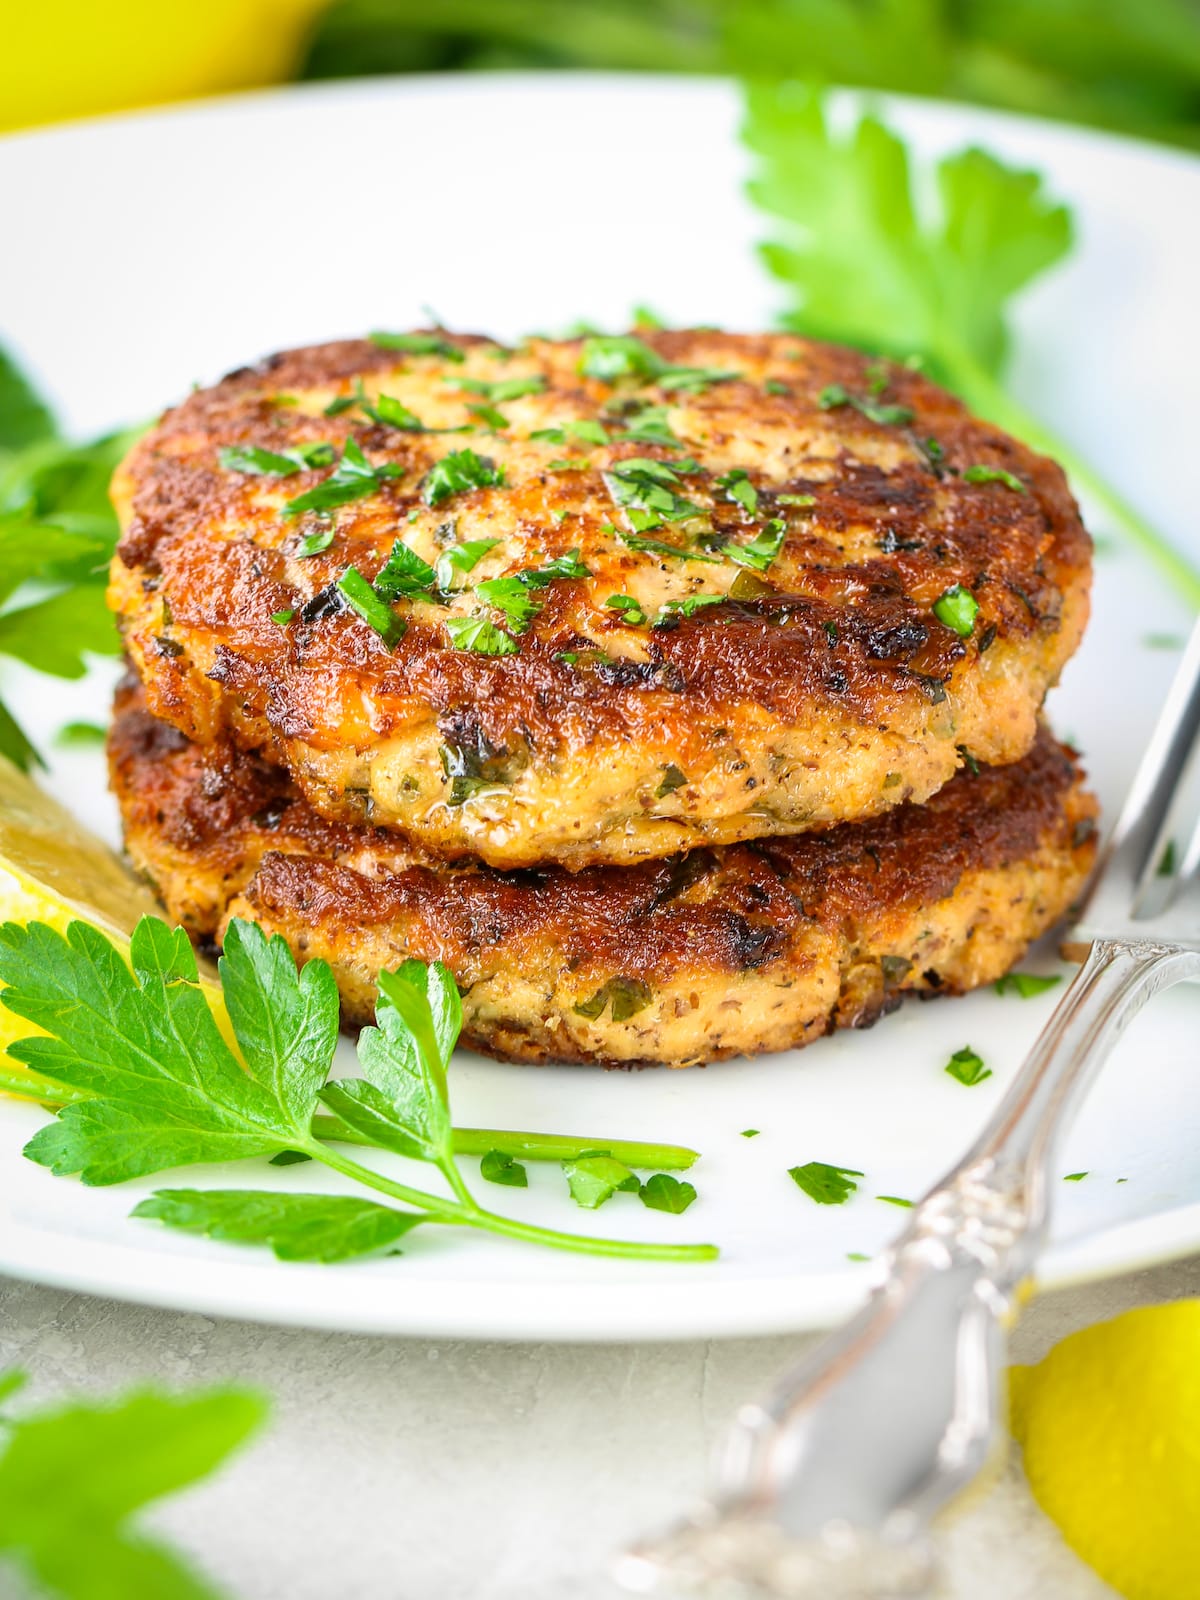 Two pan-fried salmon patties stacked on a plate.